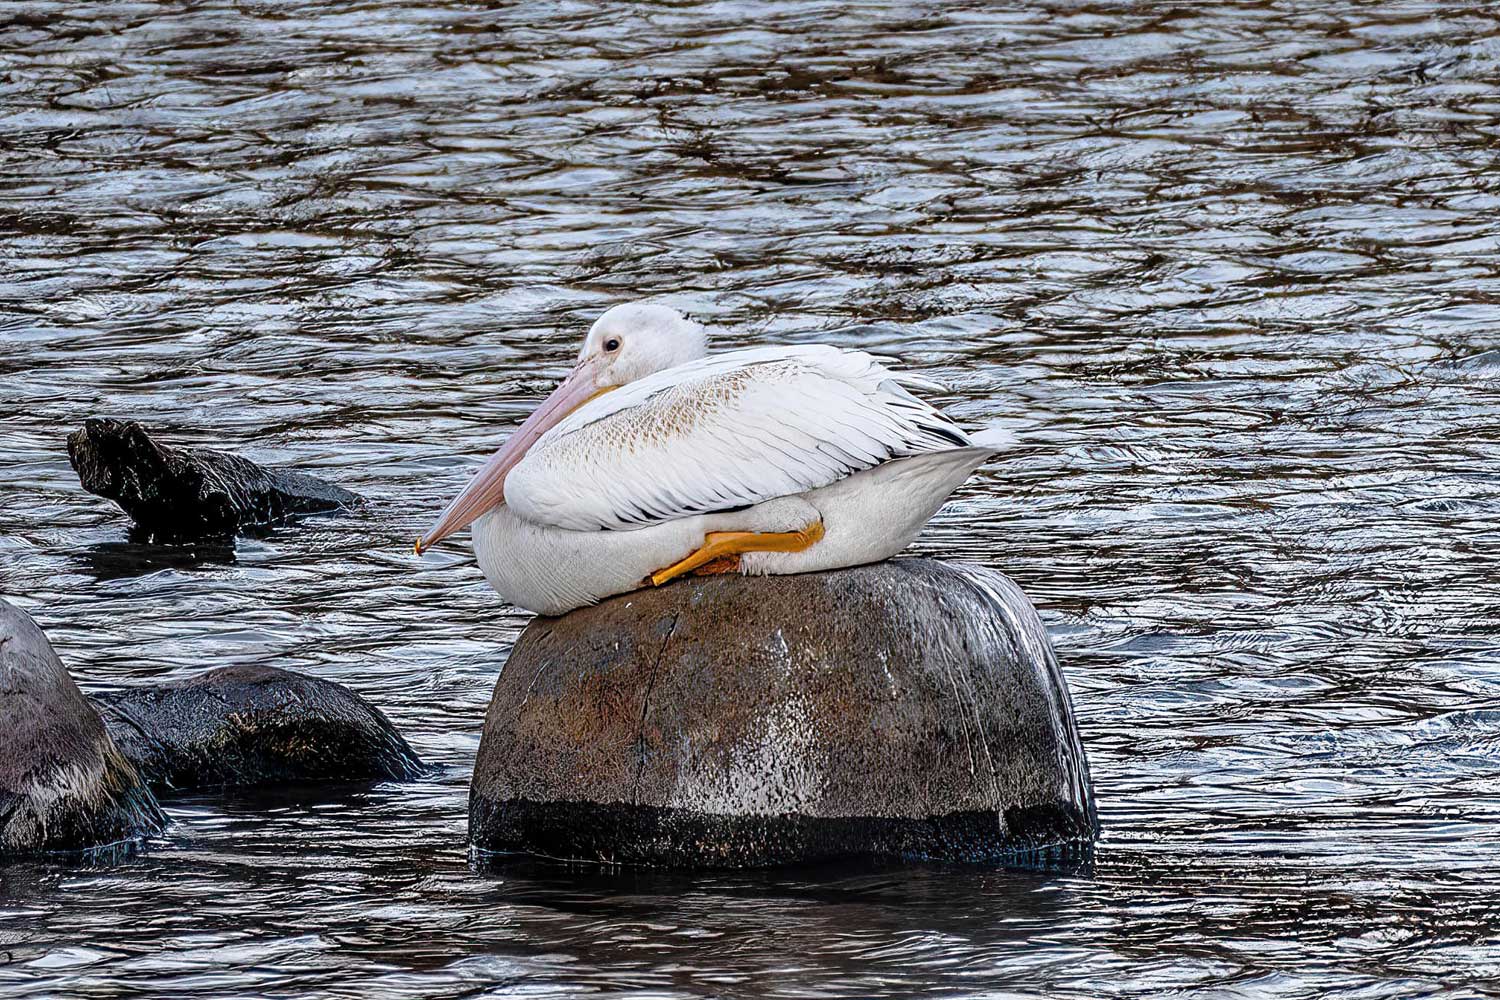 A pelican sitting at rest on a large rock emerging from the water.